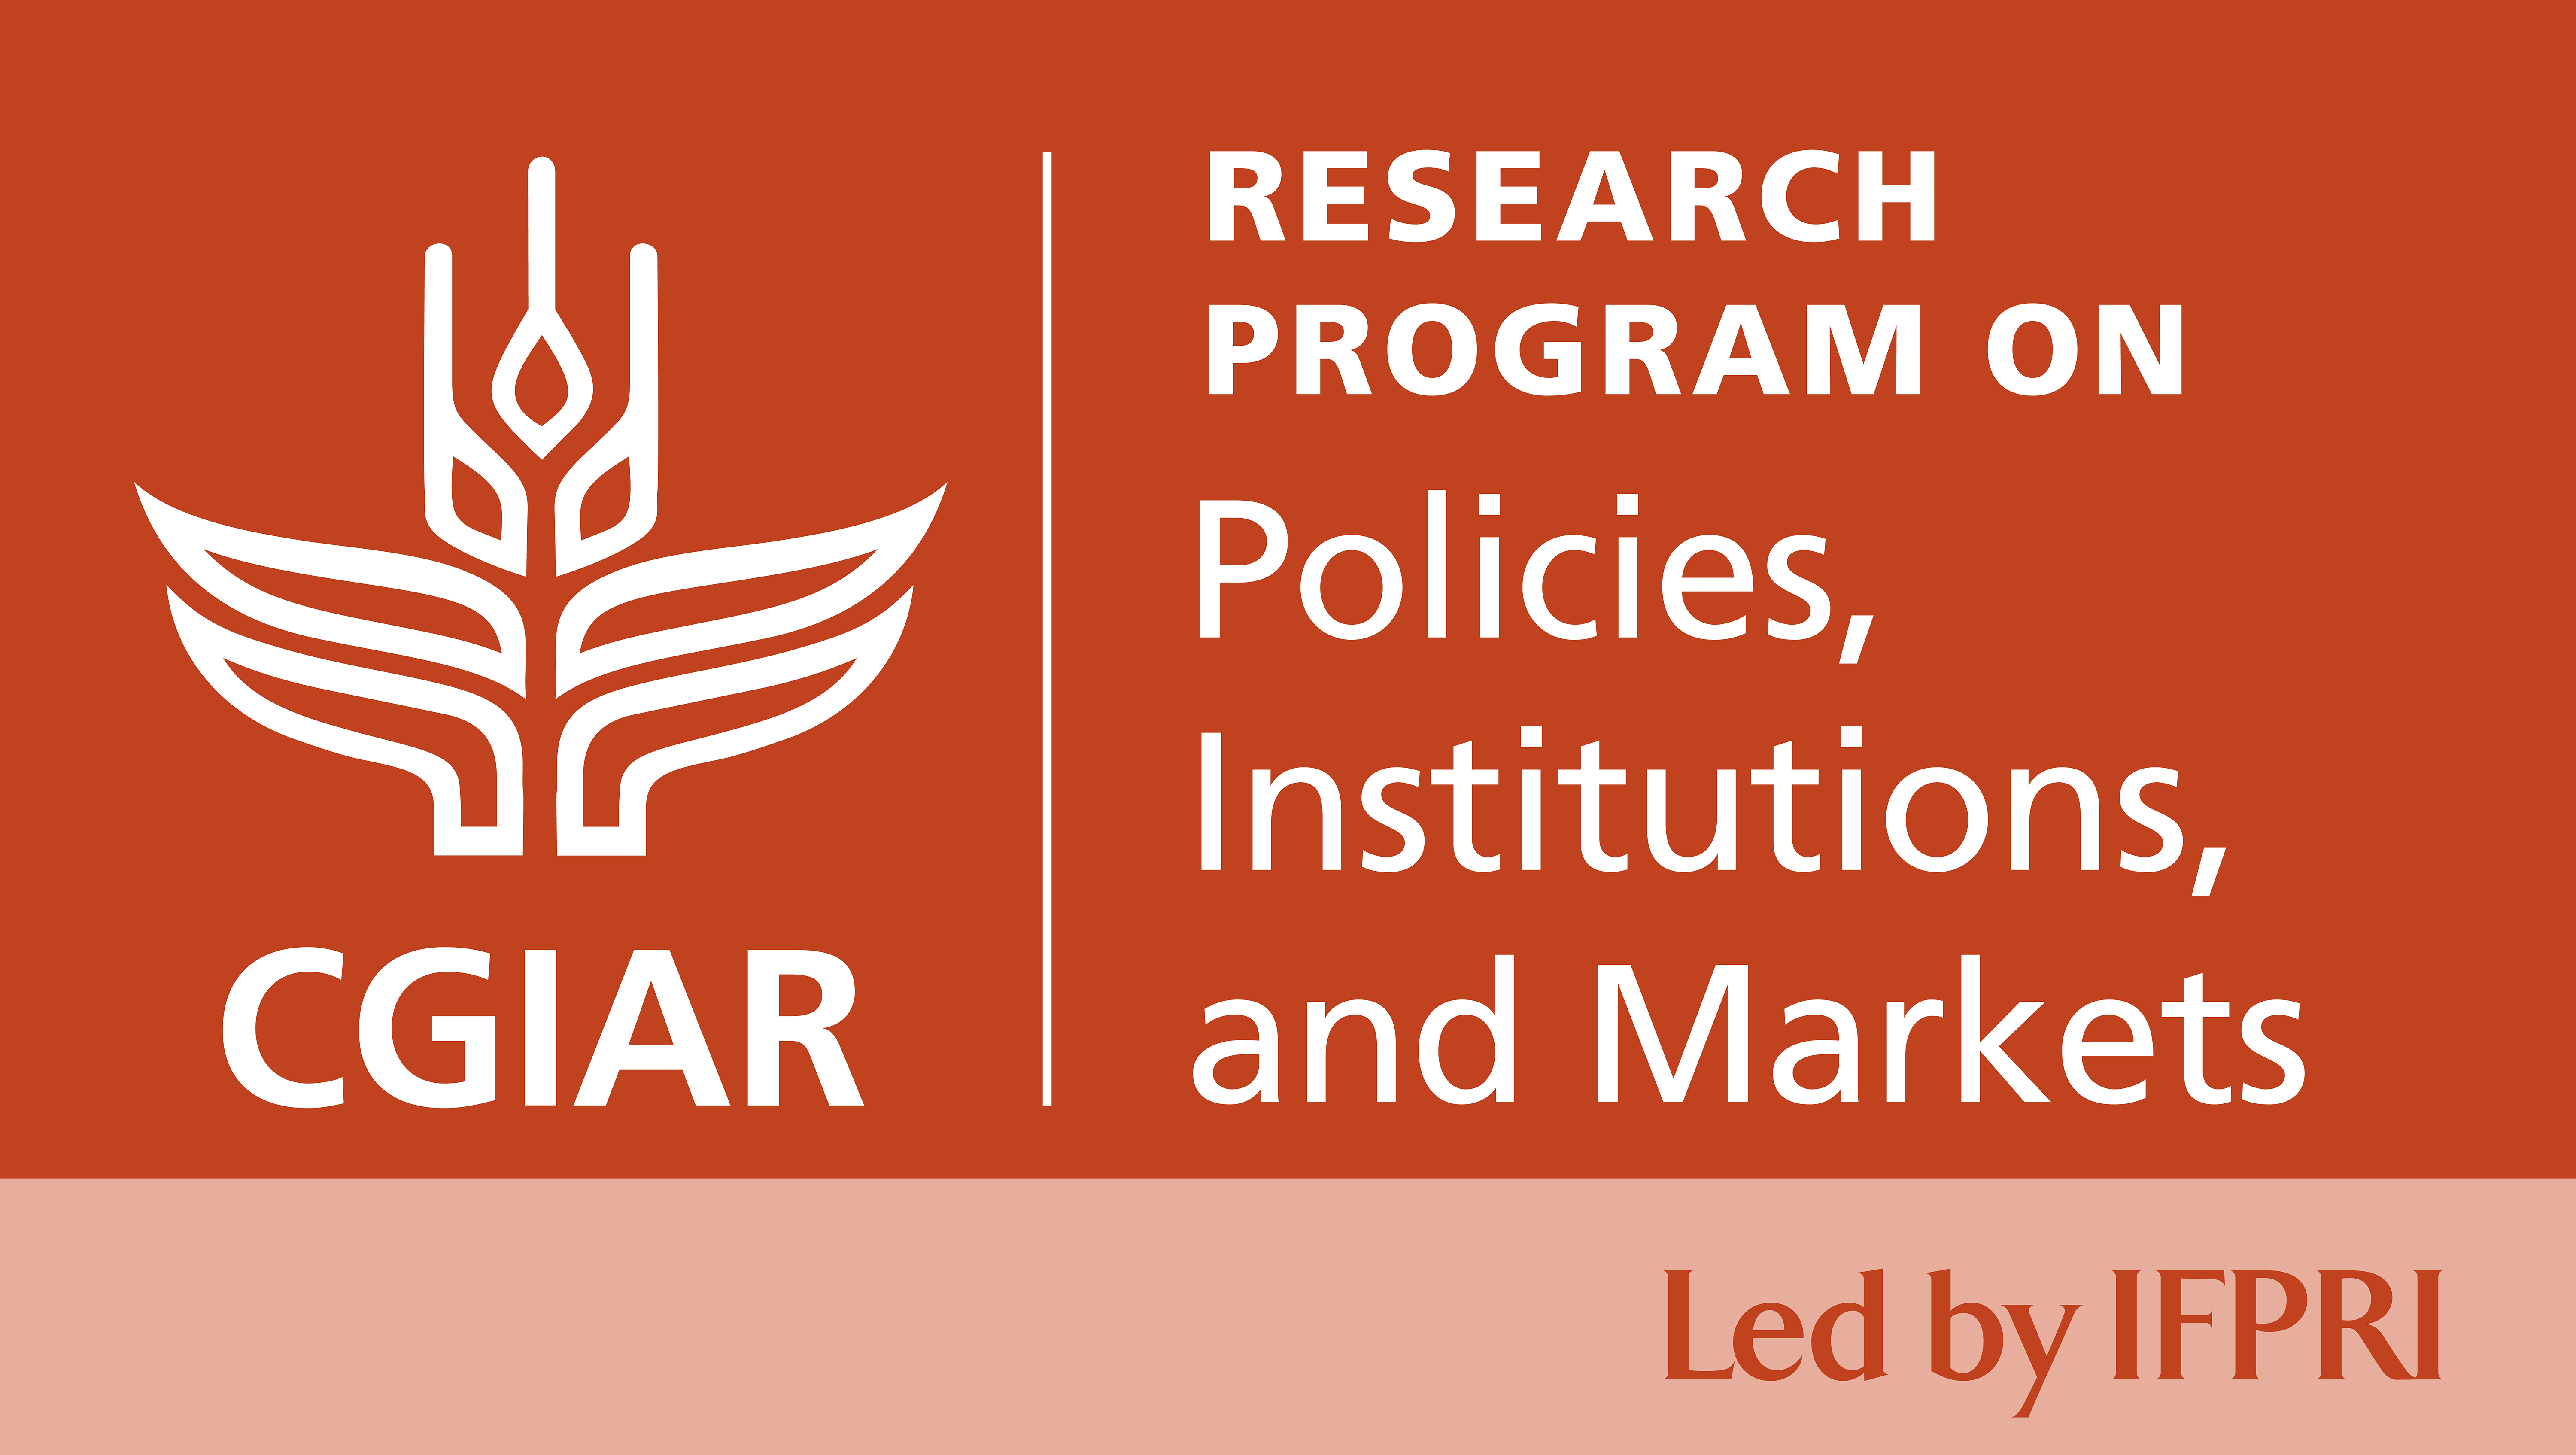 Hiring: Senior Research Fellow, CGIAR Research Program on Policies, Institutions, and Markets